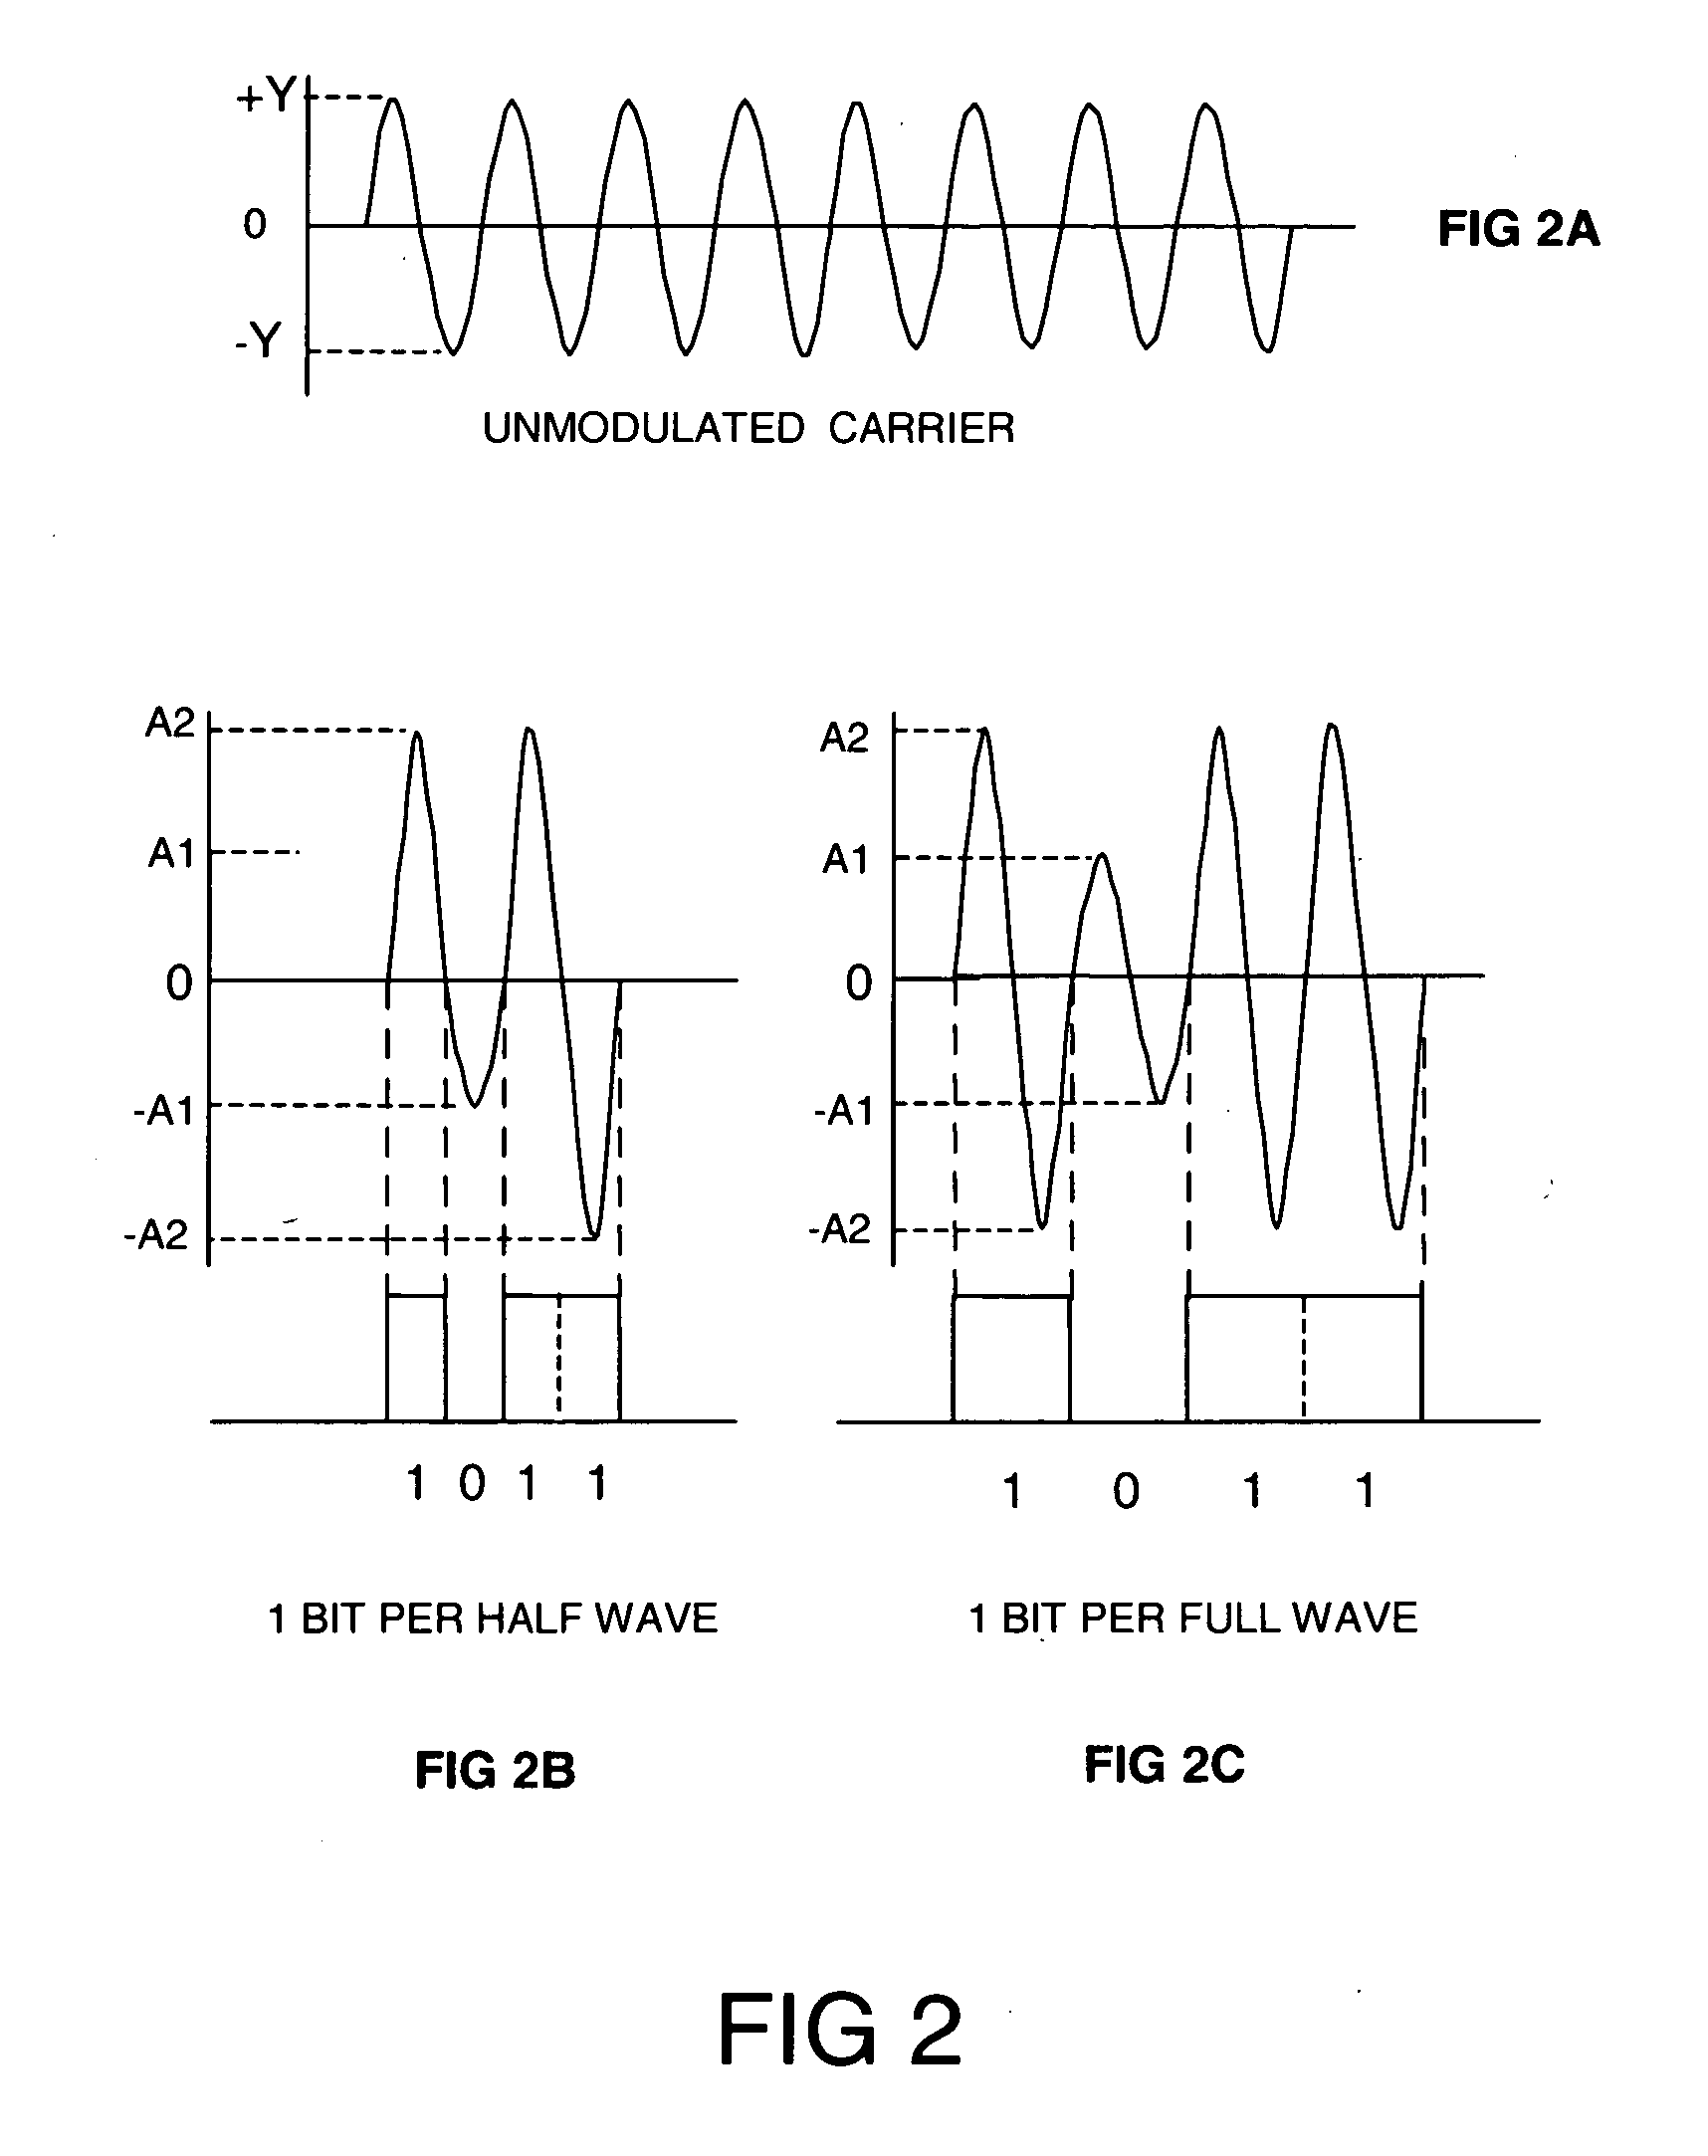 Ultra narrow band frequency selectior for zero point modulated carrier